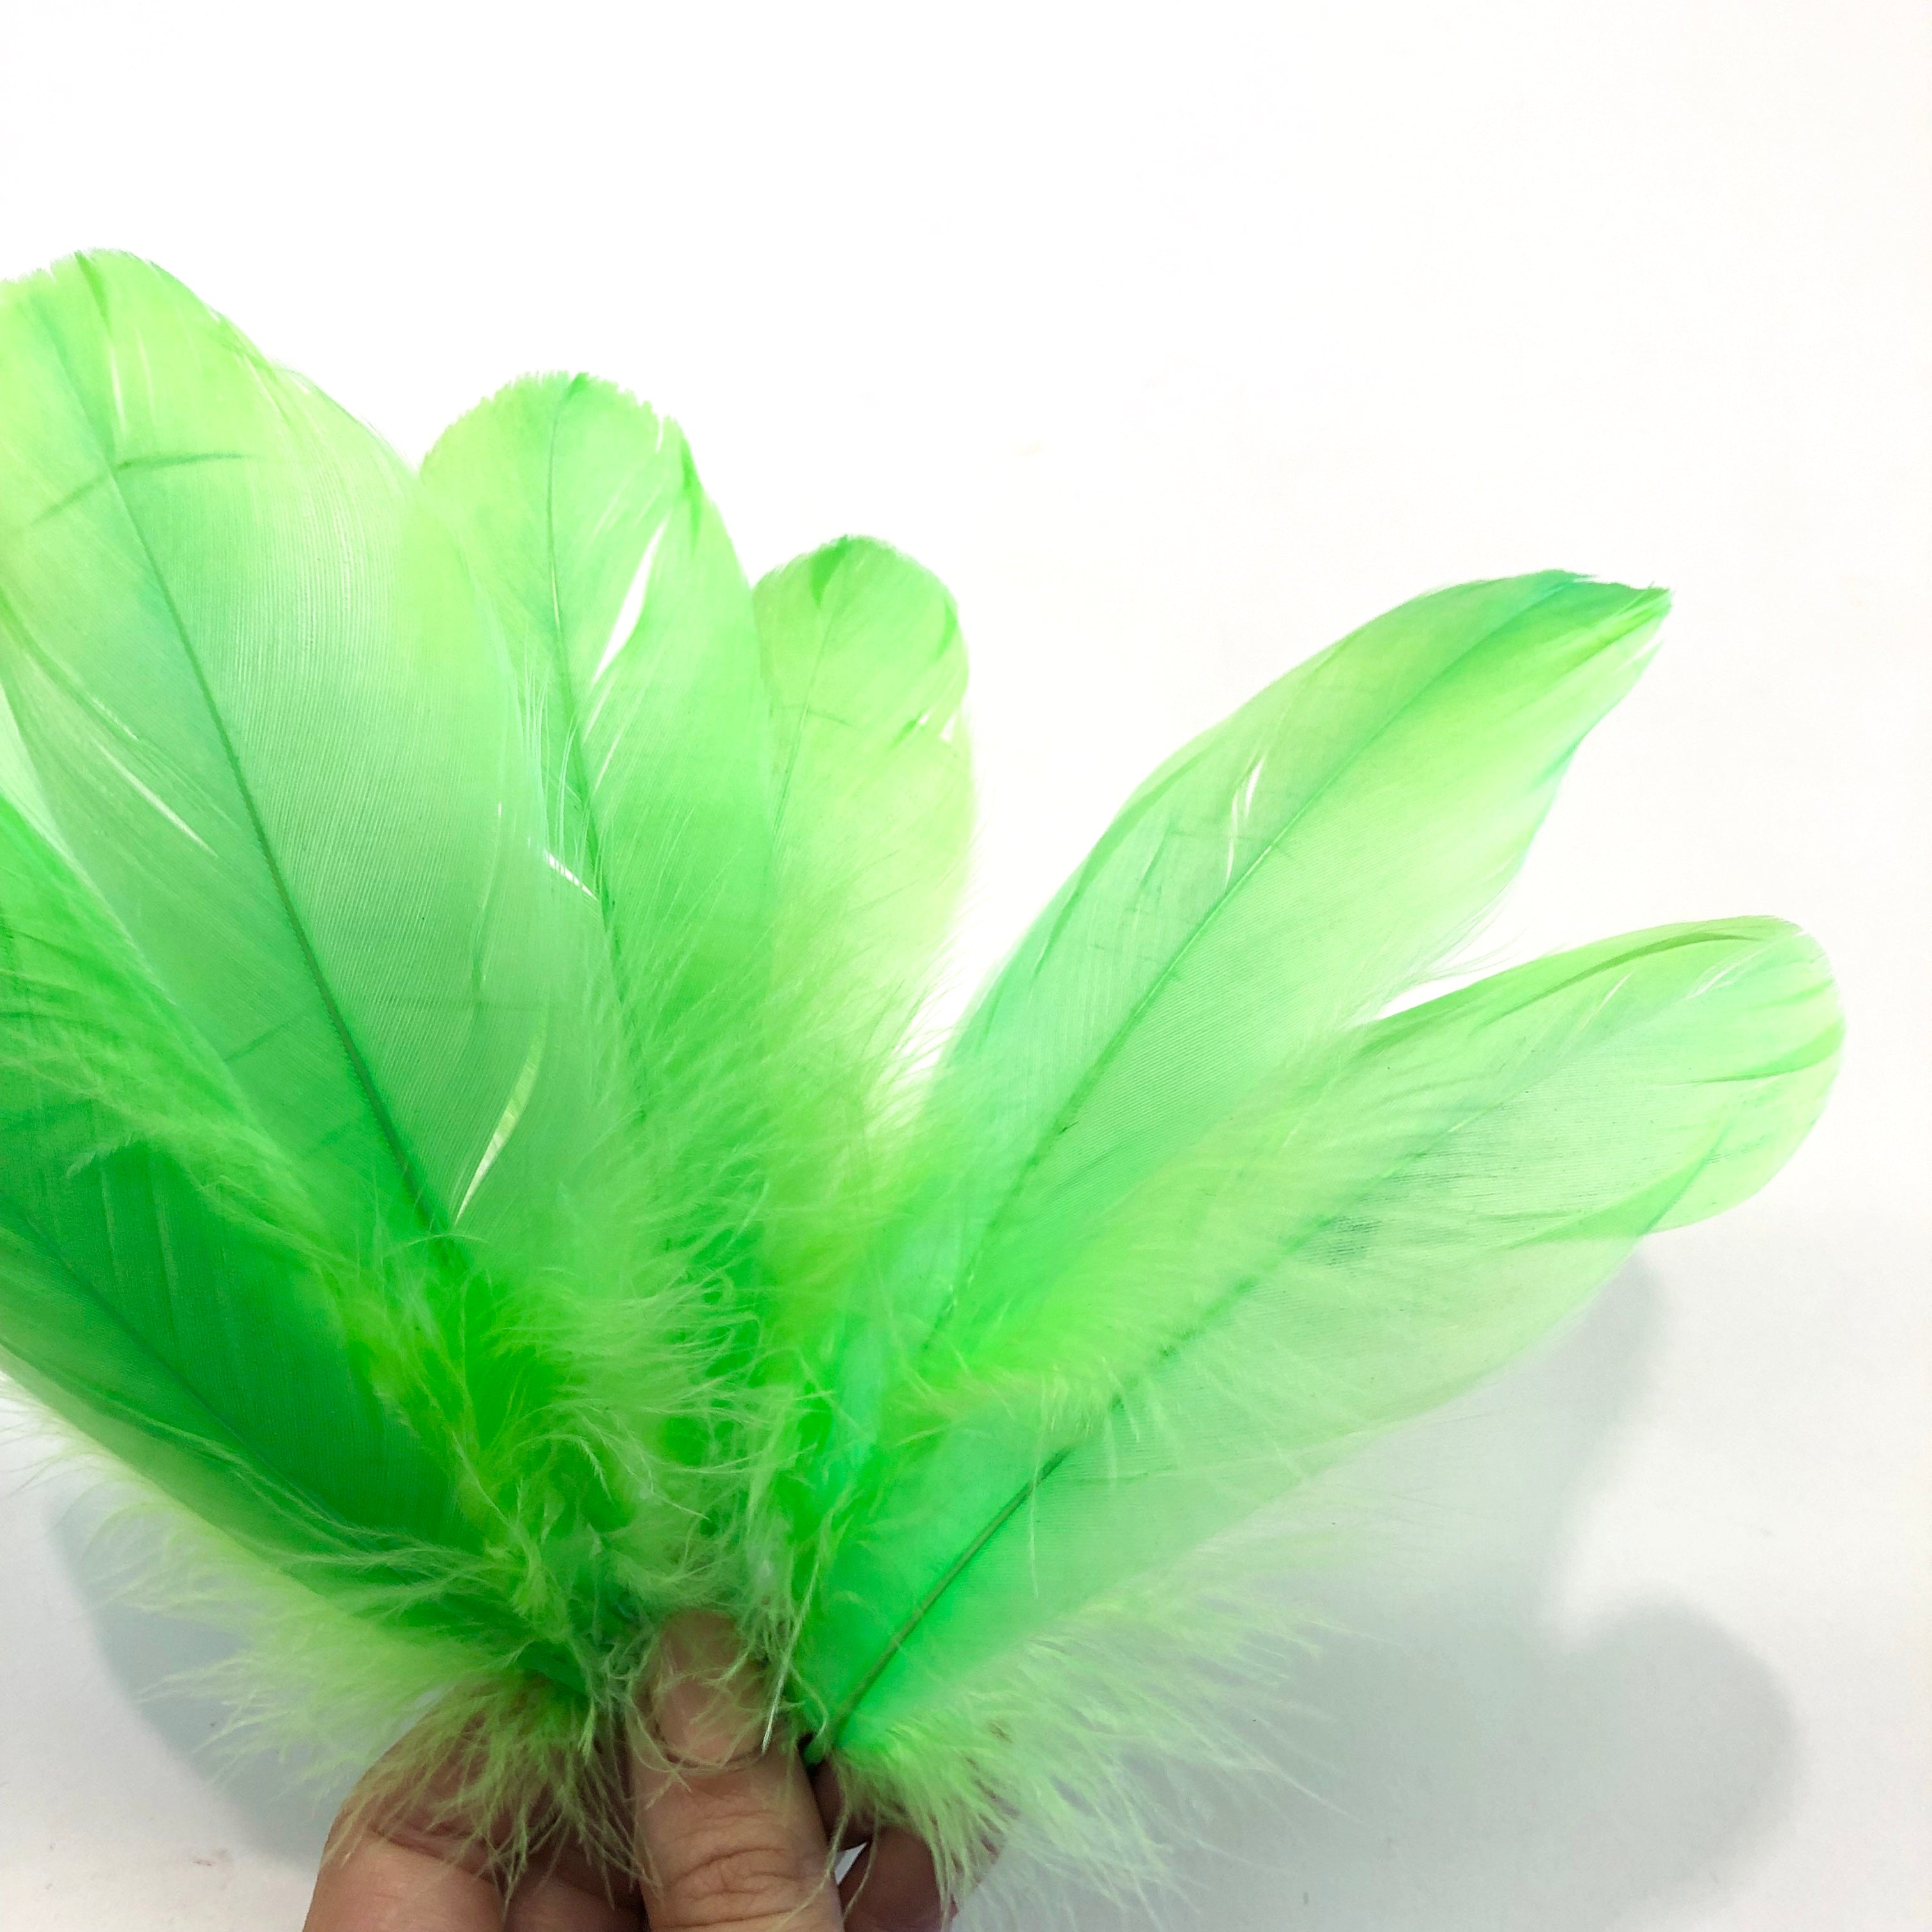 Goose Nagoire Feathers 10 grams - Neon Green